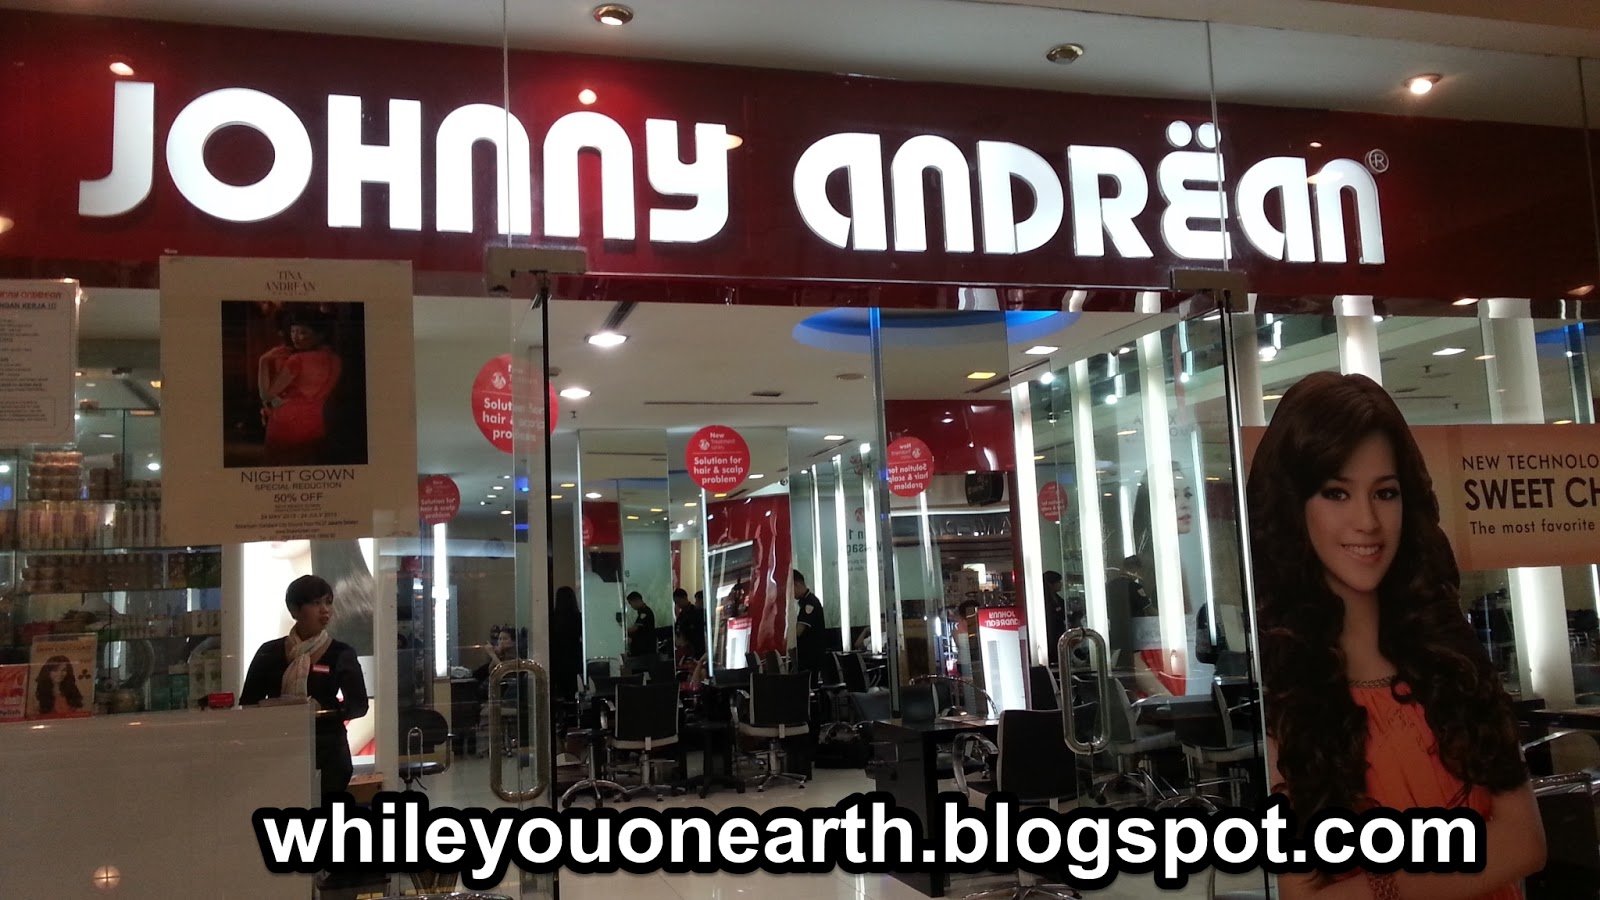 While you on earth..: Hair Gloss at Johnny Andrean Salon